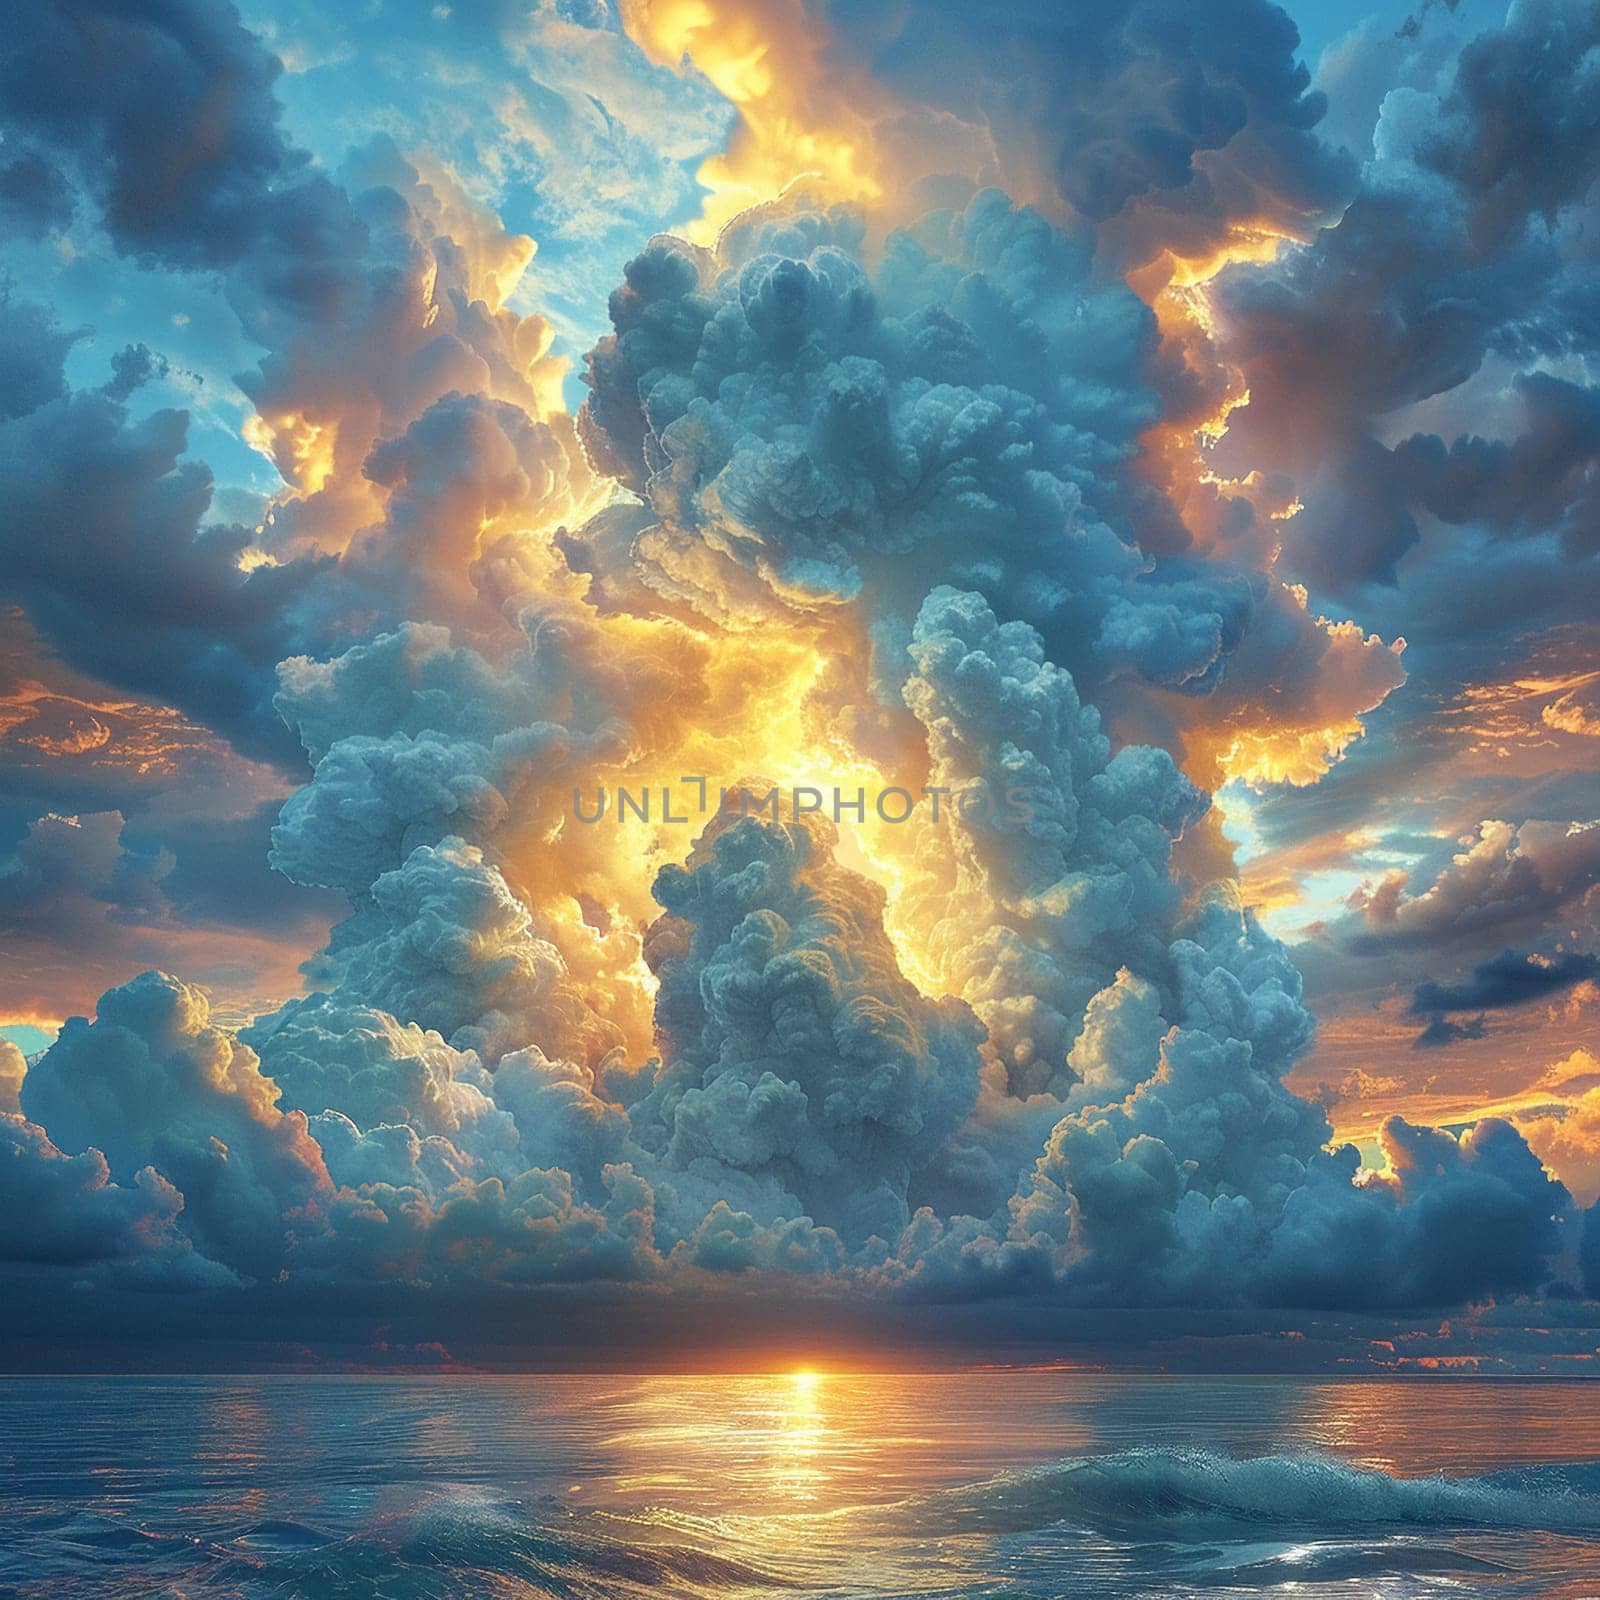 Dramatic cloud formations looming over a calm sea, illustrating the power and beauty of nature.